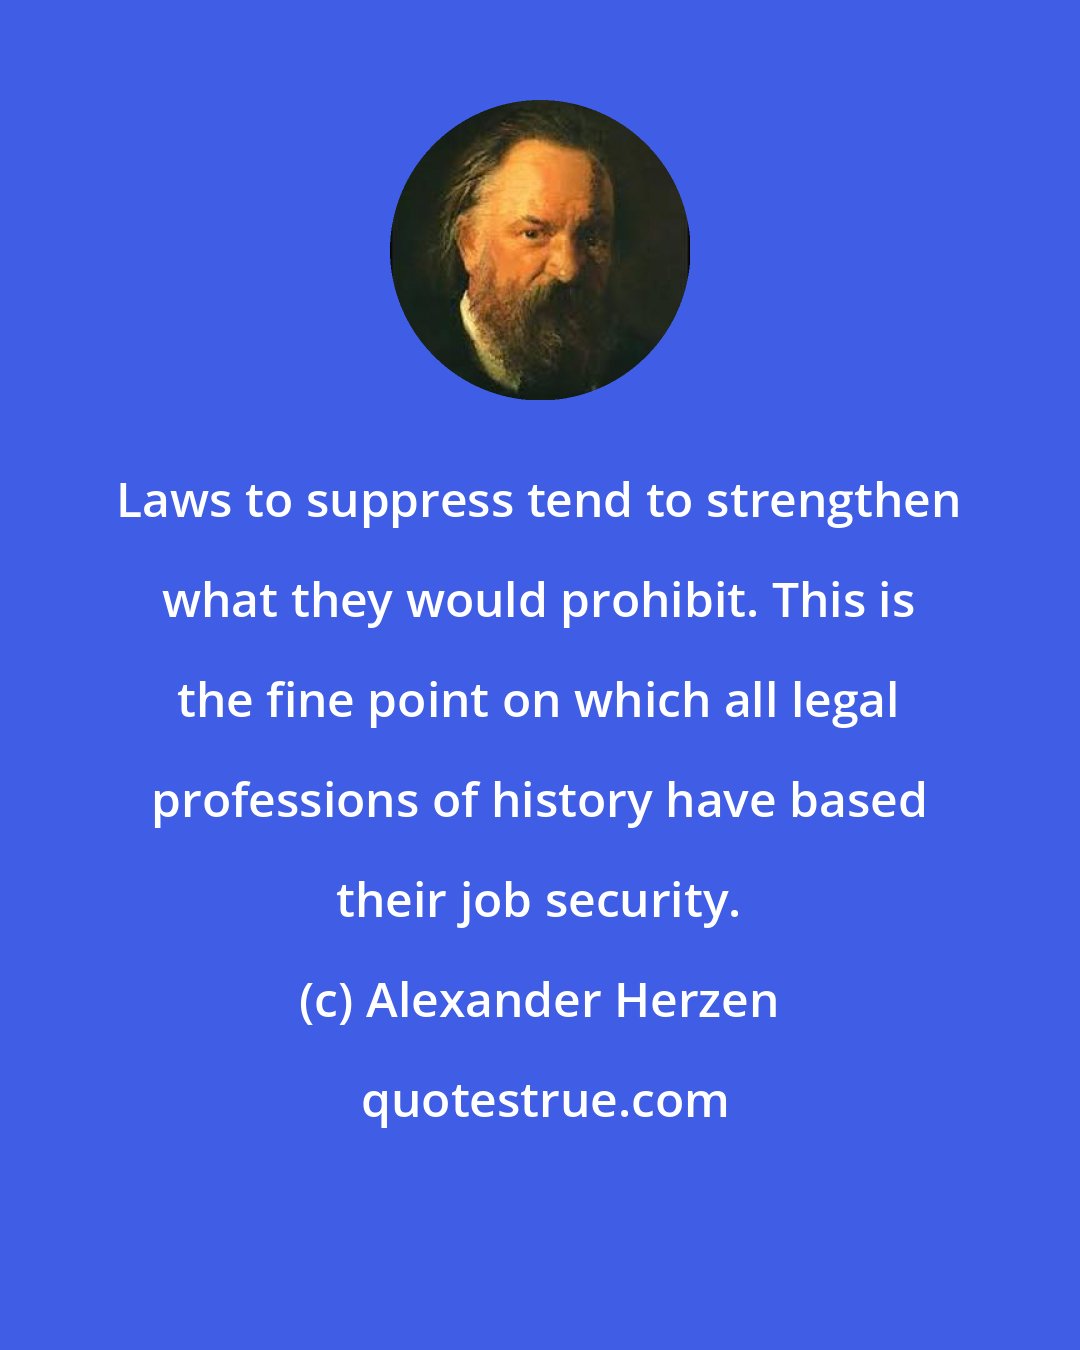 Alexander Herzen: Laws to suppress tend to strengthen what they would prohibit. This is the fine point on which all legal professions of history have based their job security.